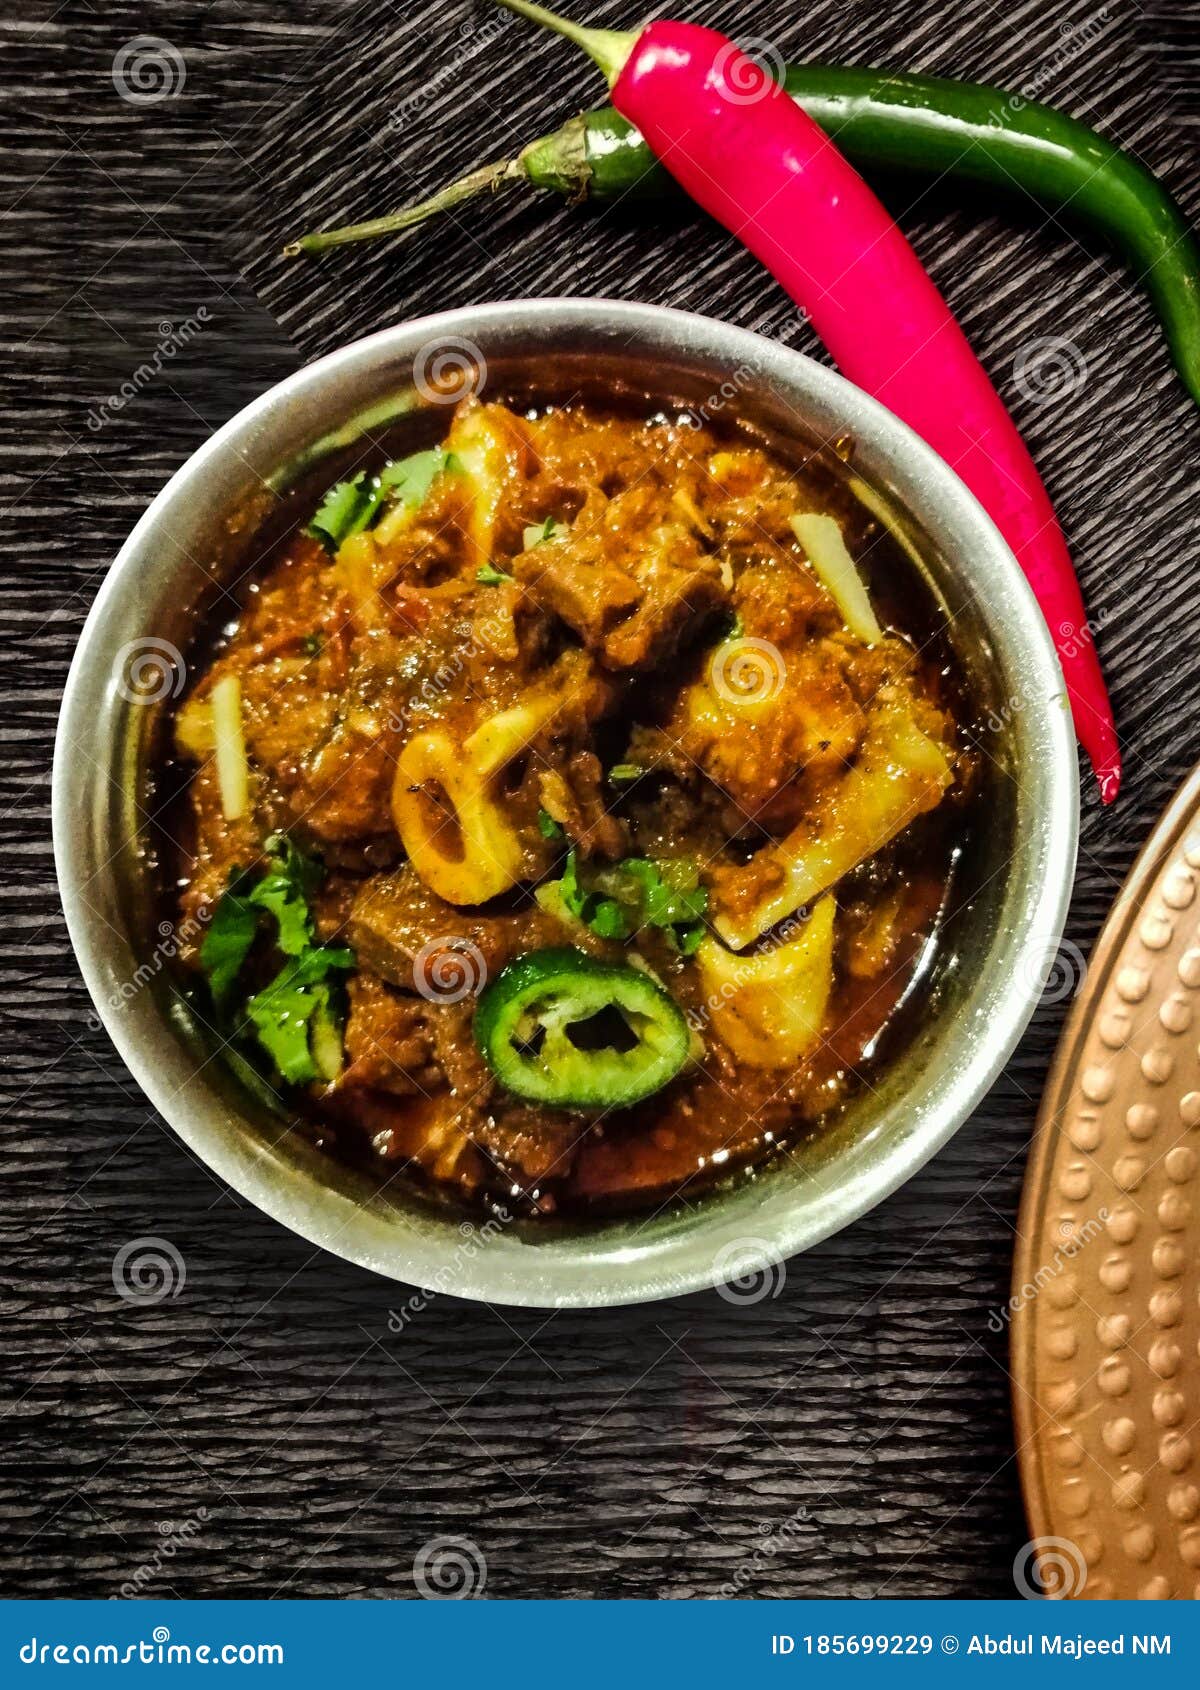 https://thumbs.dreamstime.com/z/mutton-kadai-indian-spicy-garnished-style-masala-185699229.jpg